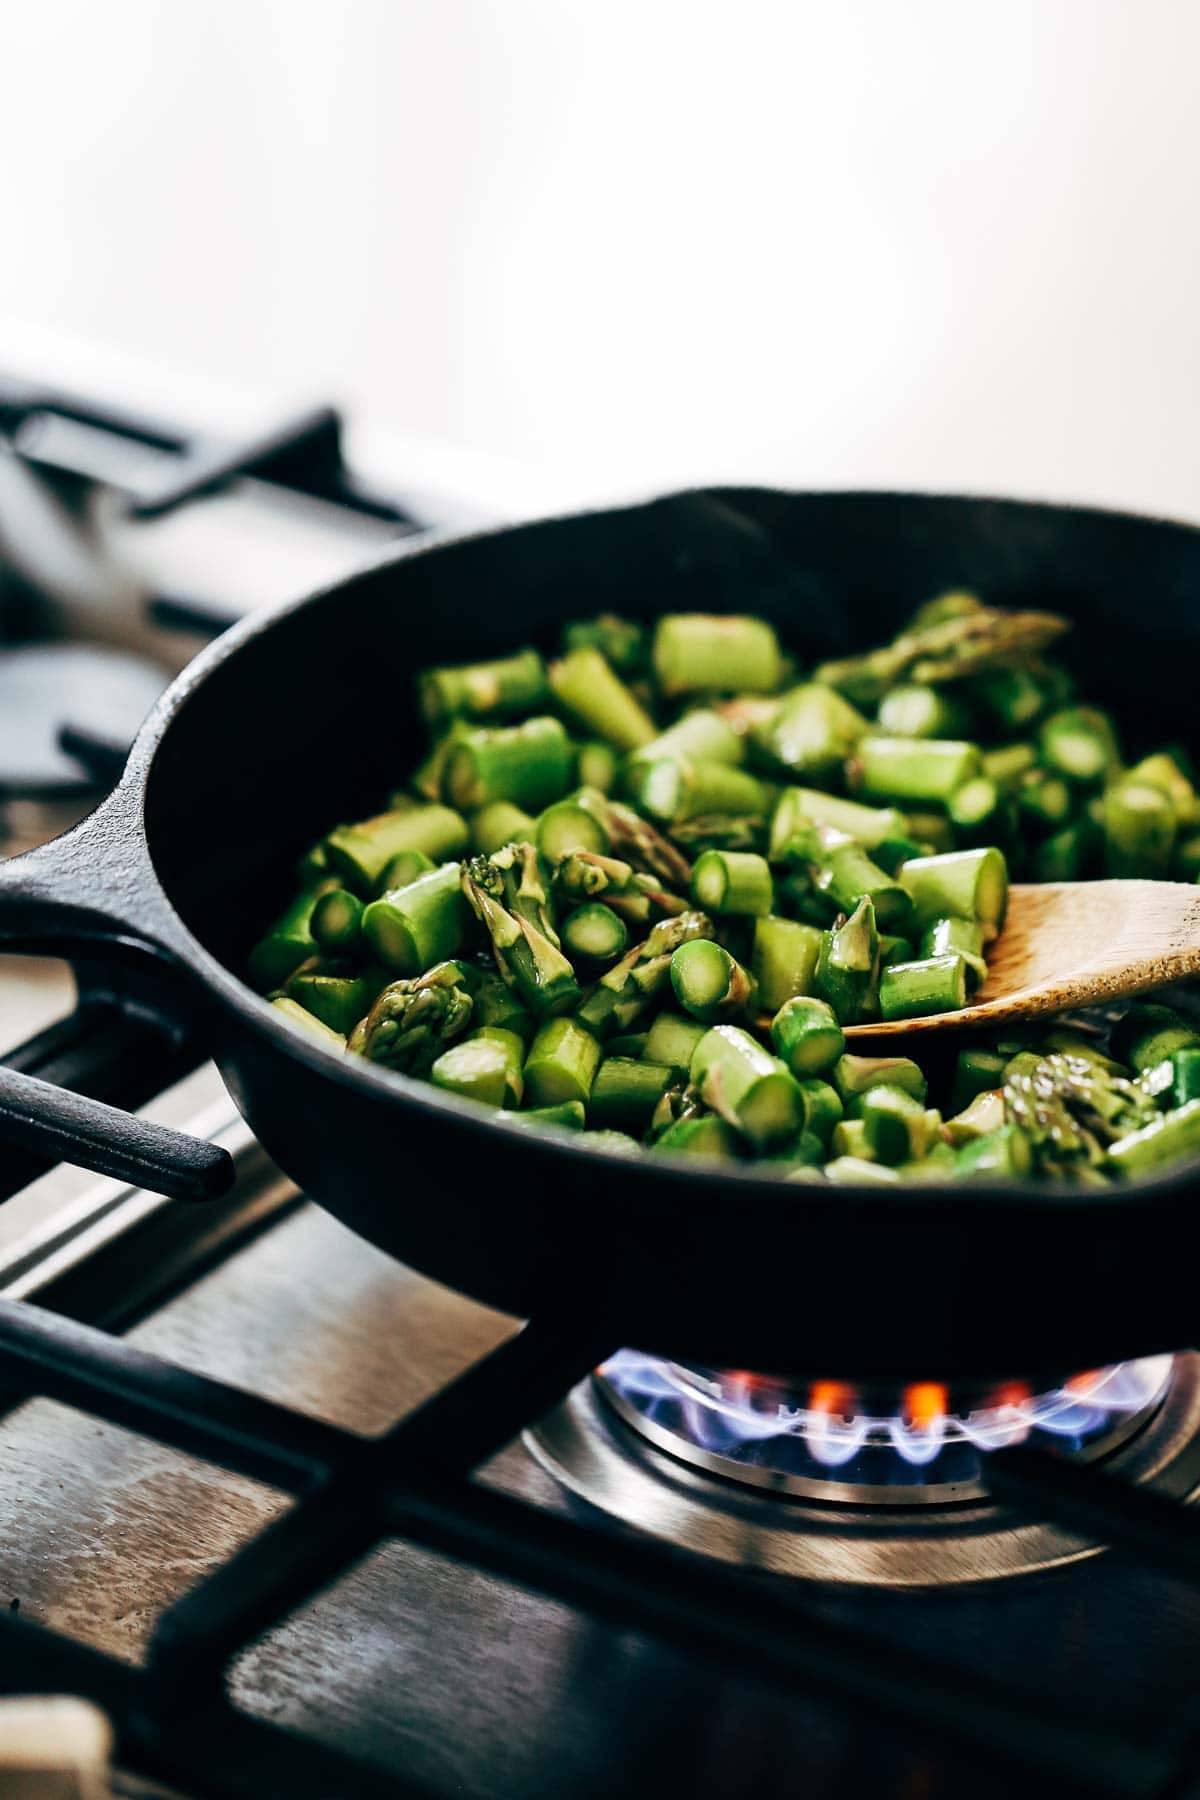 Asparagus in a skillet over the stove.